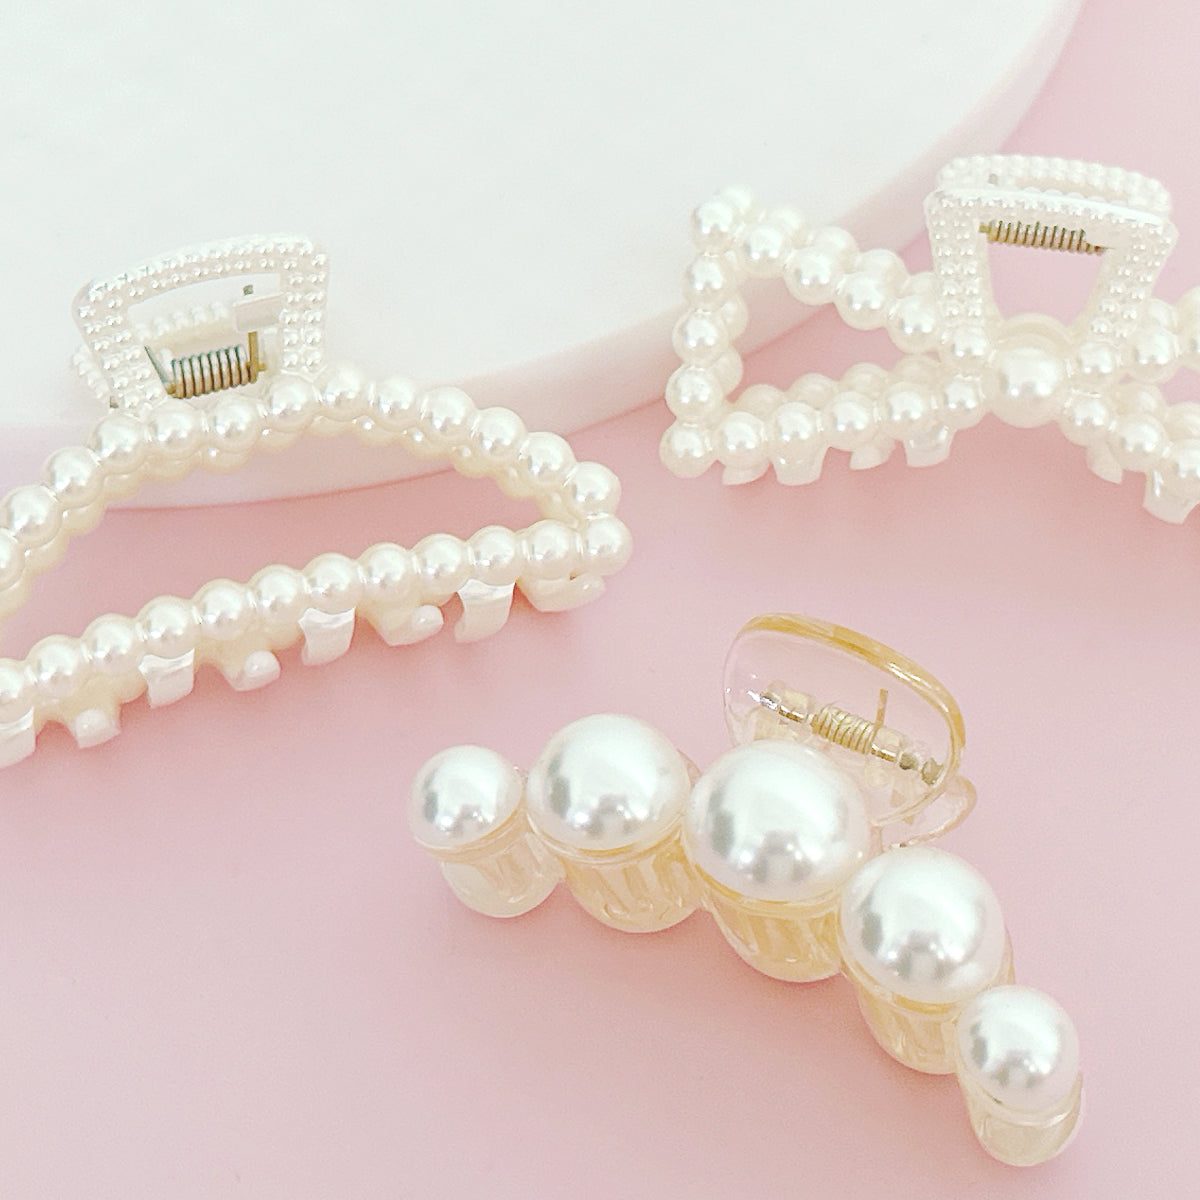 Wrapables Large Pearl Hair Claws Faux Pearl Hair Clips Nonslip Jaw Clips Hair Styling (Set of 3)